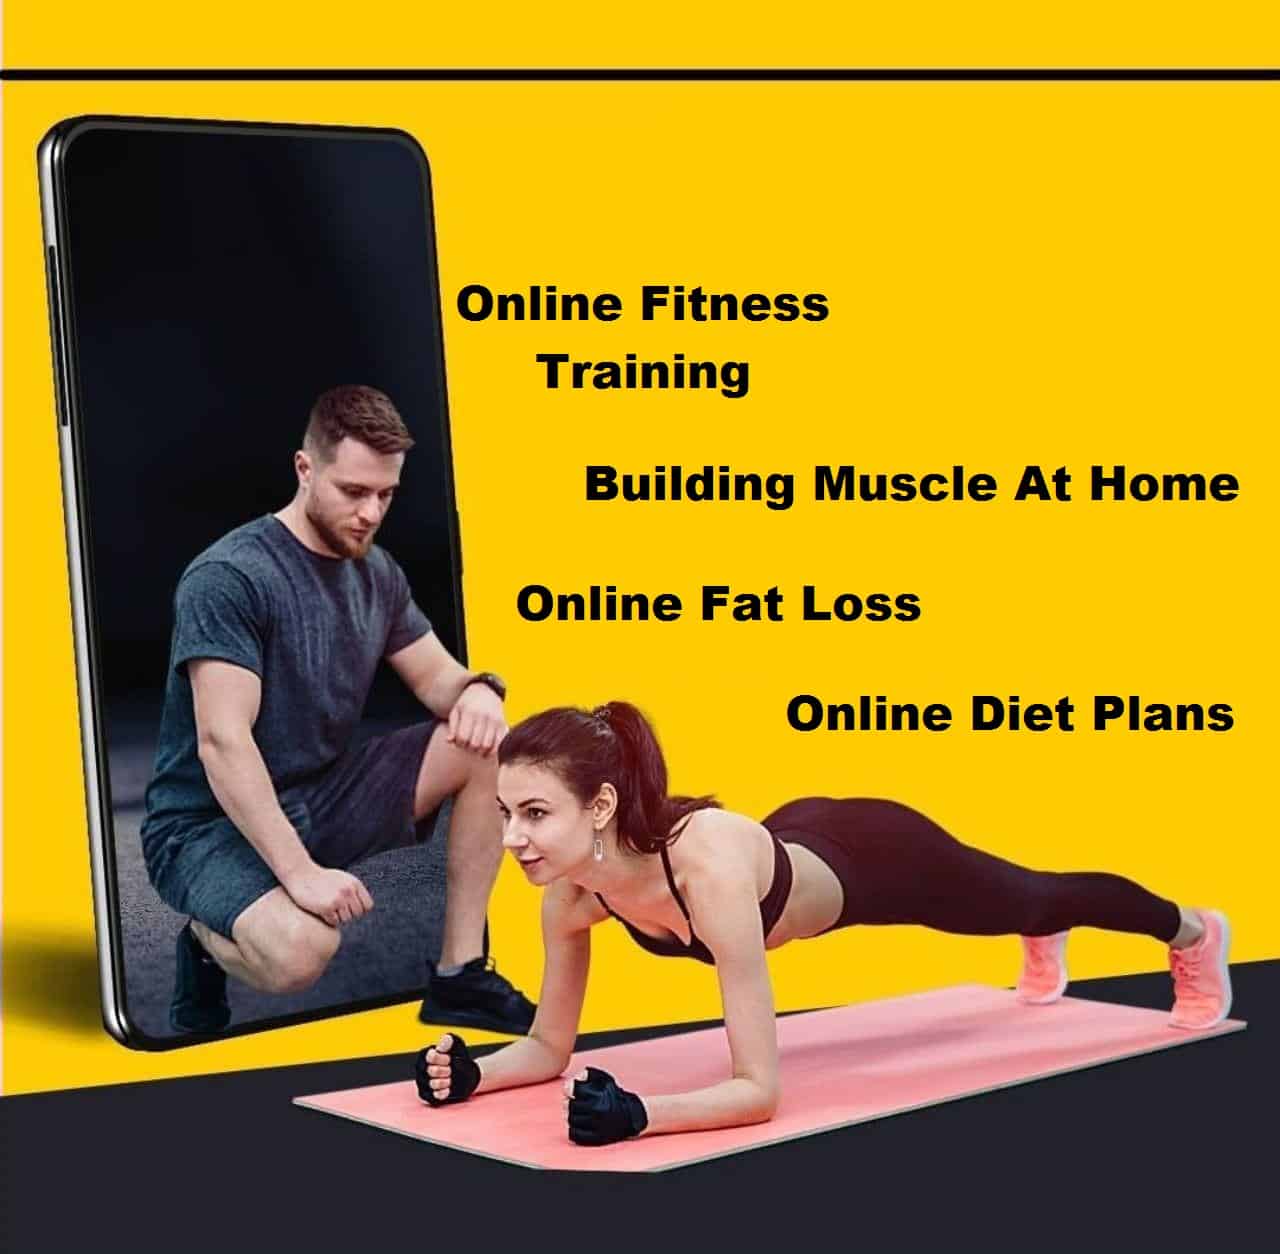 Online Personal Fitness Training- A Programme Designed to Suit Your Fitness Needs